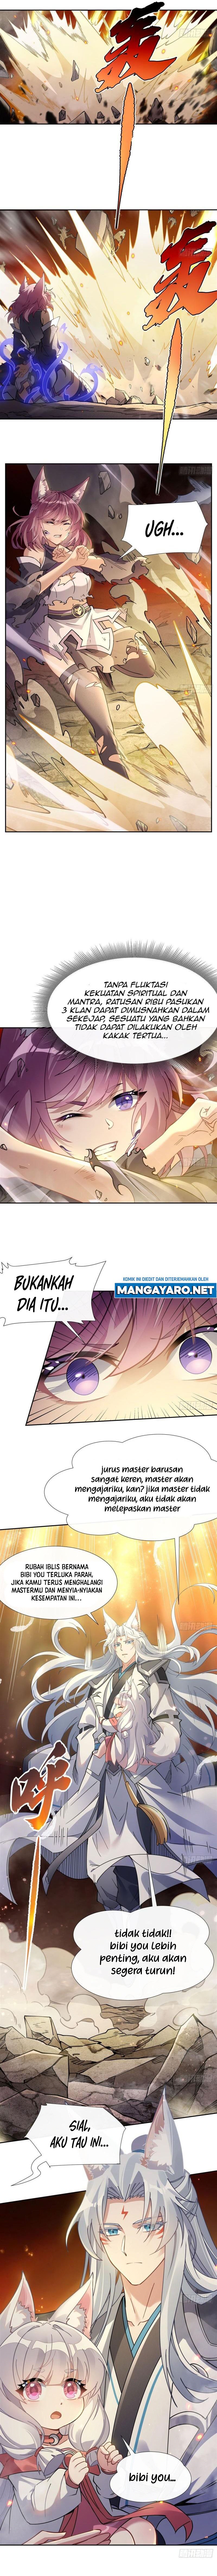 Dilarang COPAS - situs resmi www.mangacanblog.com - Komik my female apprentices are all big shots from the future 175 - chapter 175 176 Indonesia my female apprentices are all big shots from the future 175 - chapter 175 Terbaru 8|Baca Manga Komik Indonesia|Mangacan